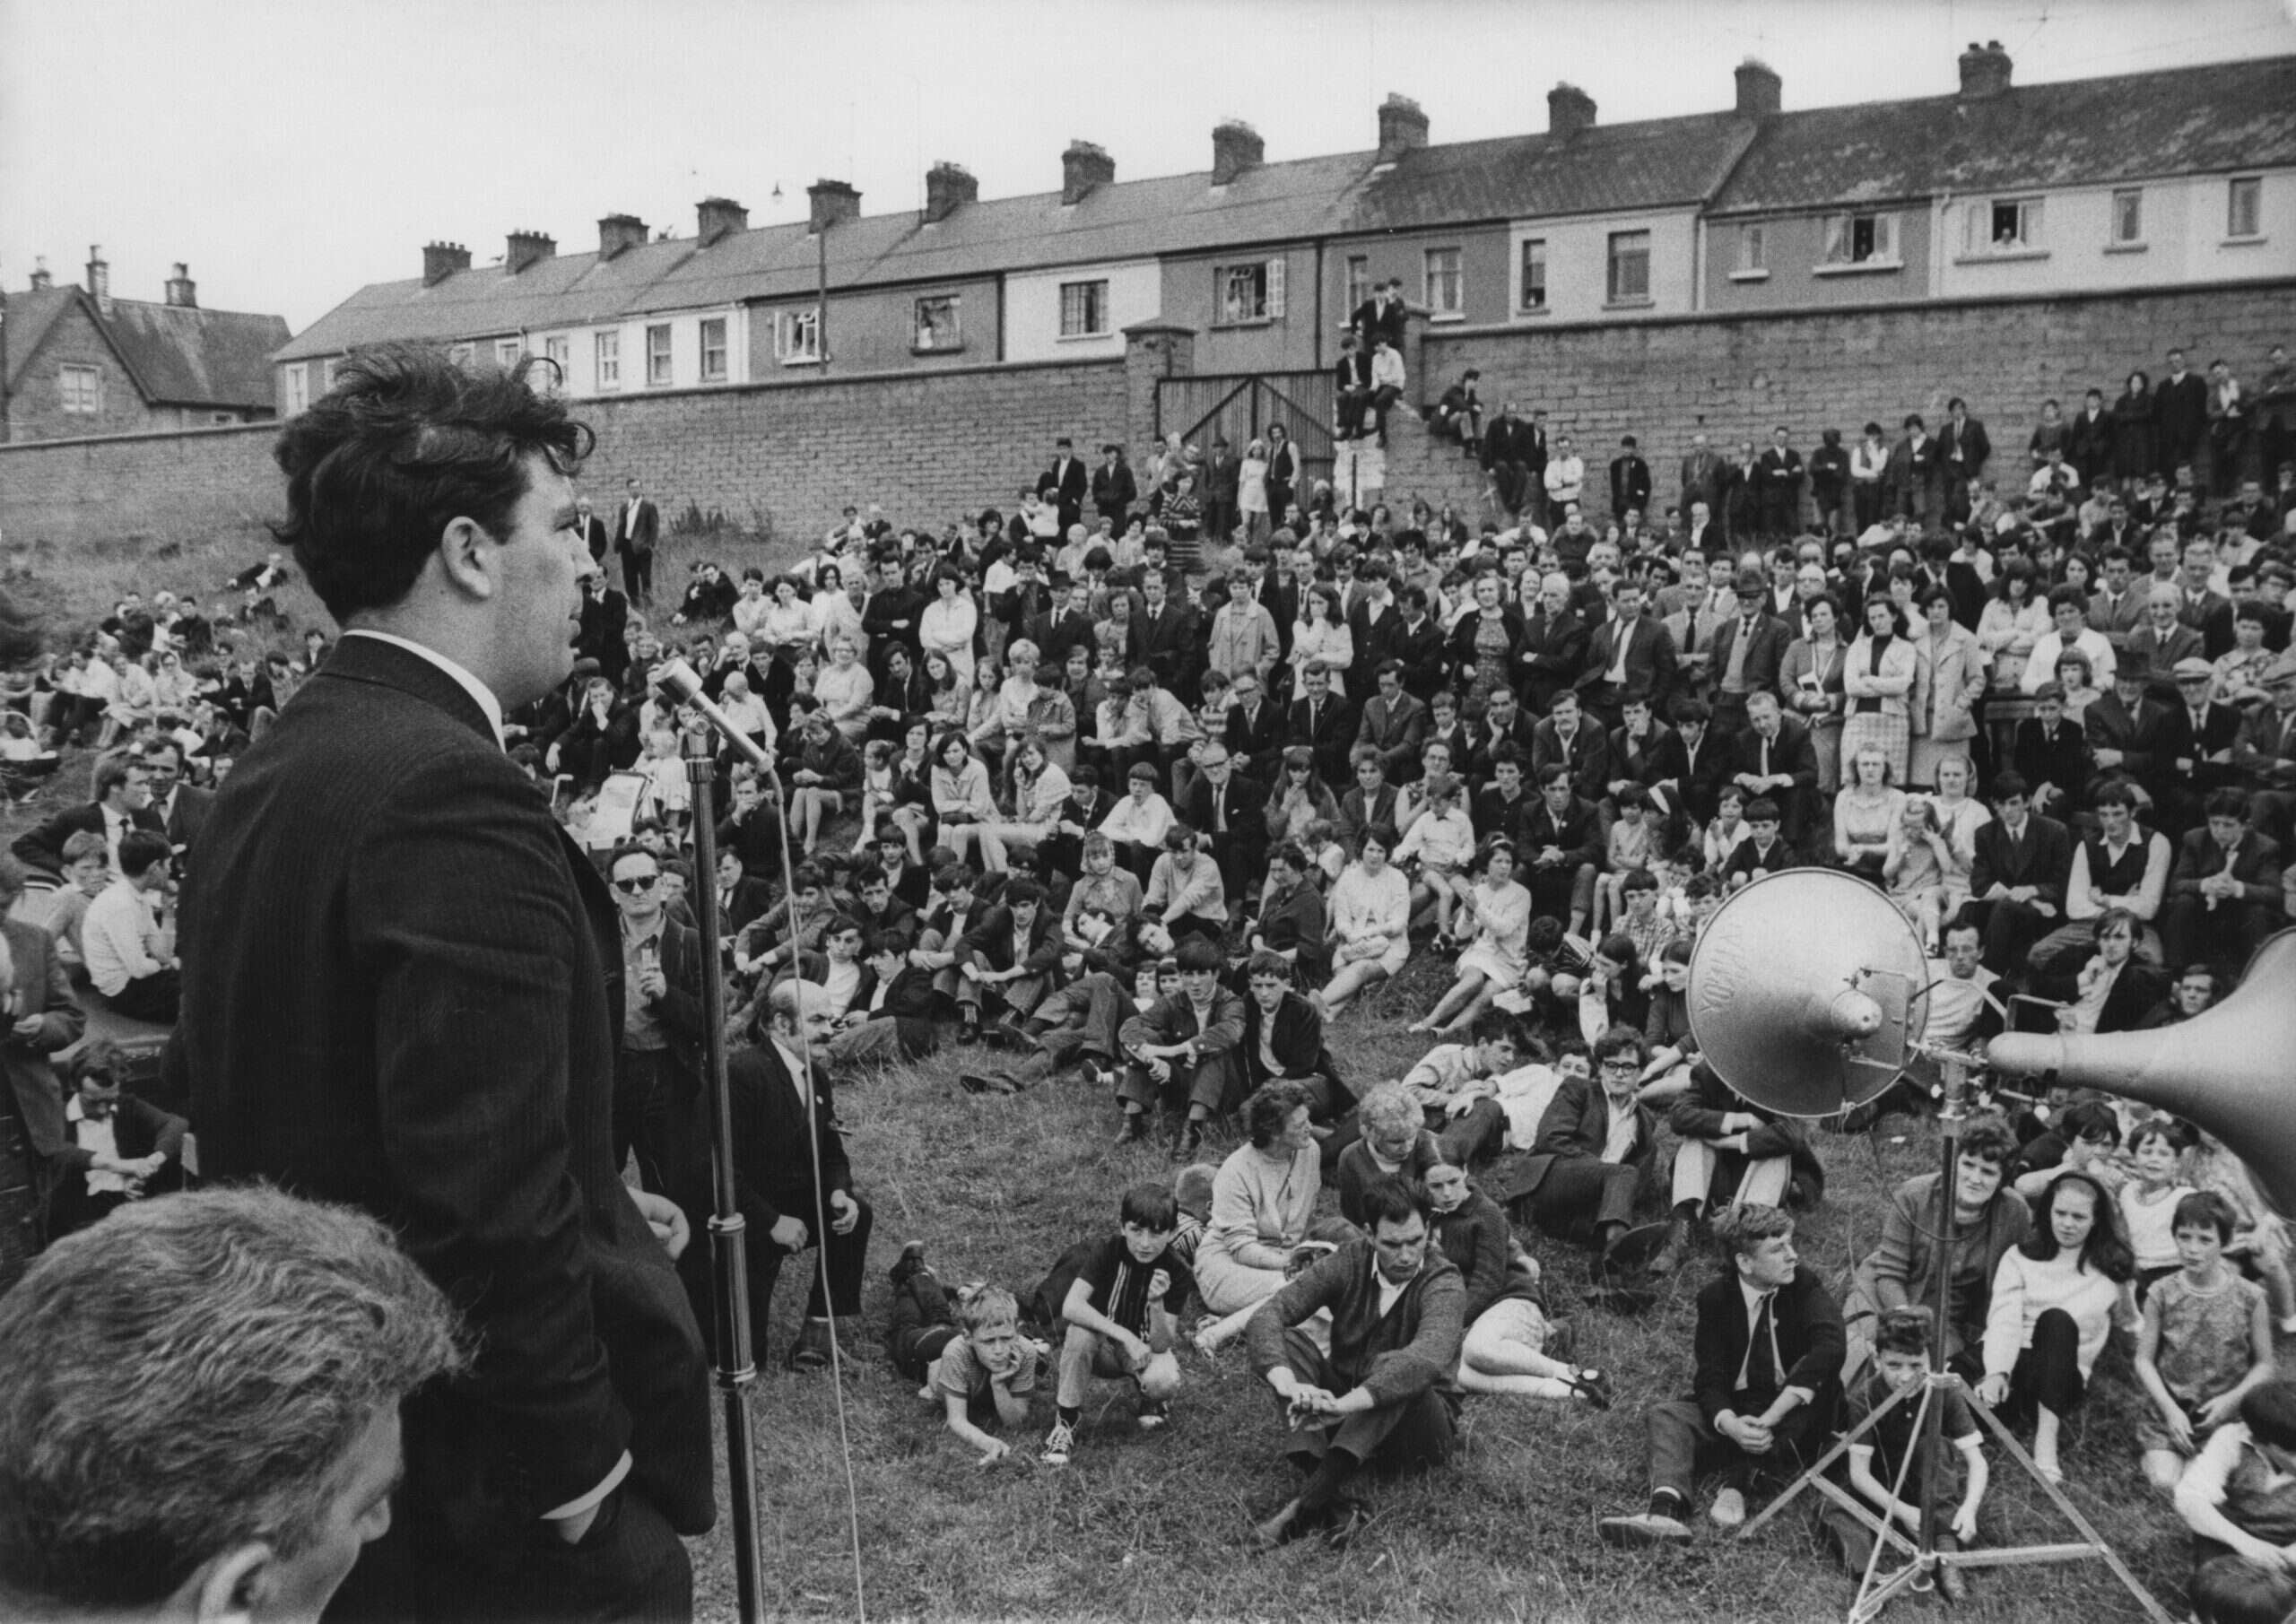 A year after John Hume’s death, his vision offers a way forward for Northern Ireland